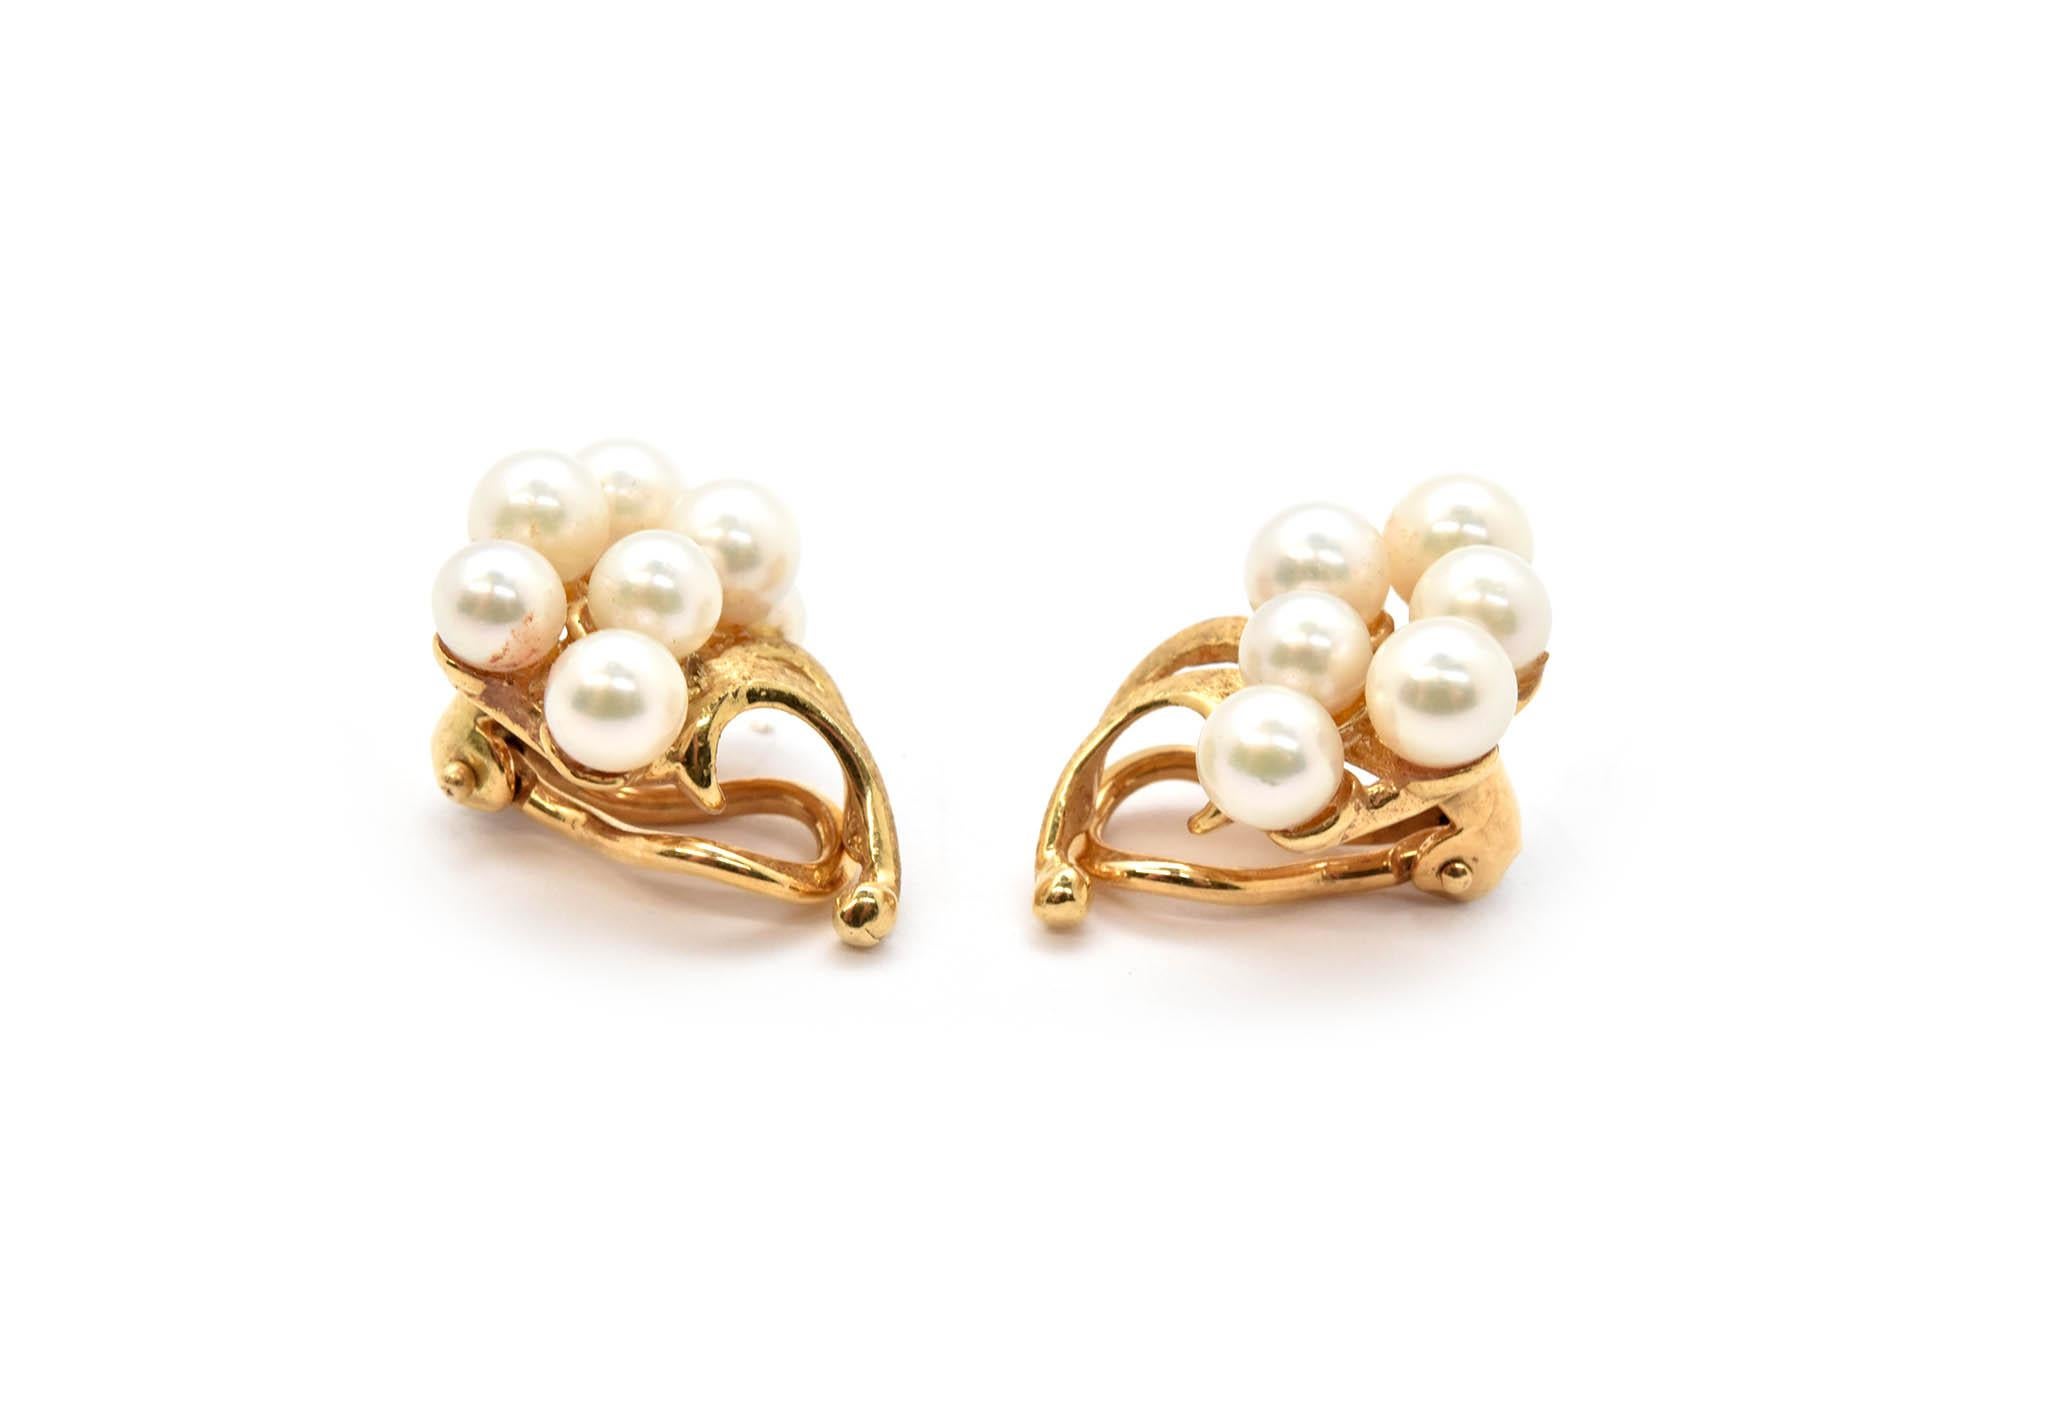 These earrings are made in 14k yellow gold. Each earring features a cluster of seven pearls ranging from 4.2-5mm. This lovely pair measures 19x17mm, and are completed with omega clip-on backs. Together the pair weighs 7.29 grams. 